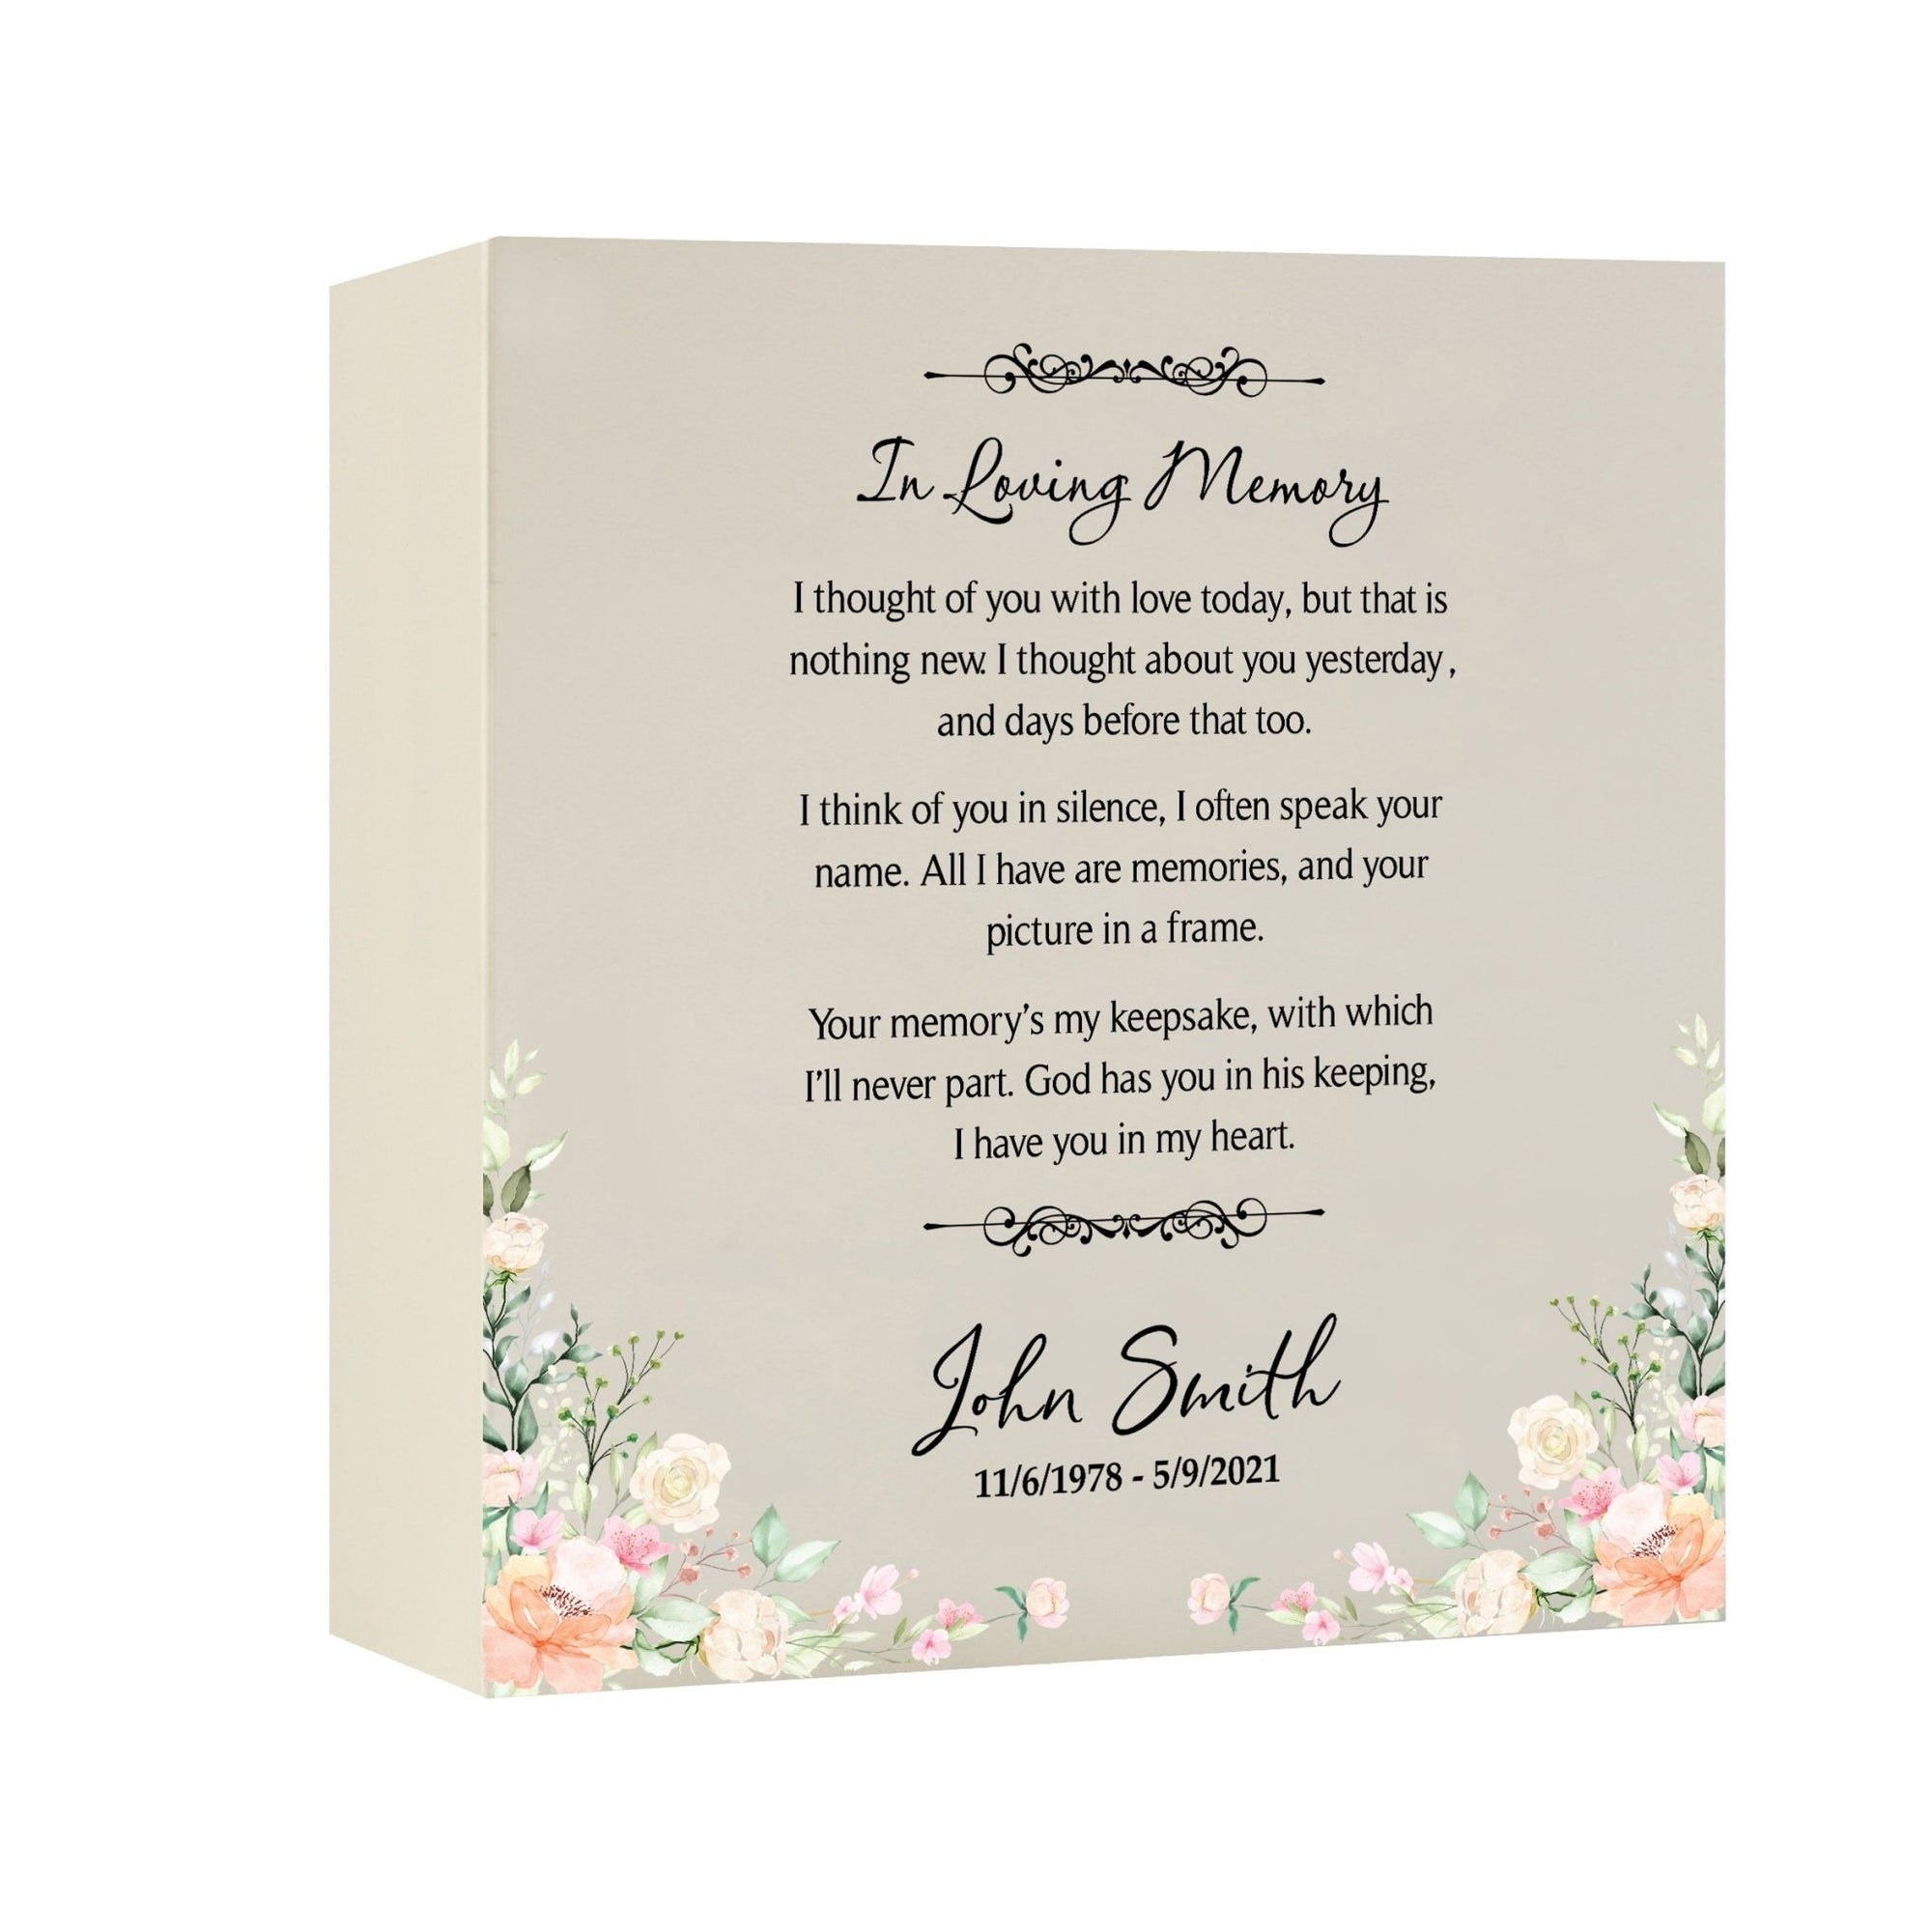 Timeless Human Memorial Shadow Box Urn With Inspirational Verse in Ivory - In Loving Memory - LifeSong Milestones